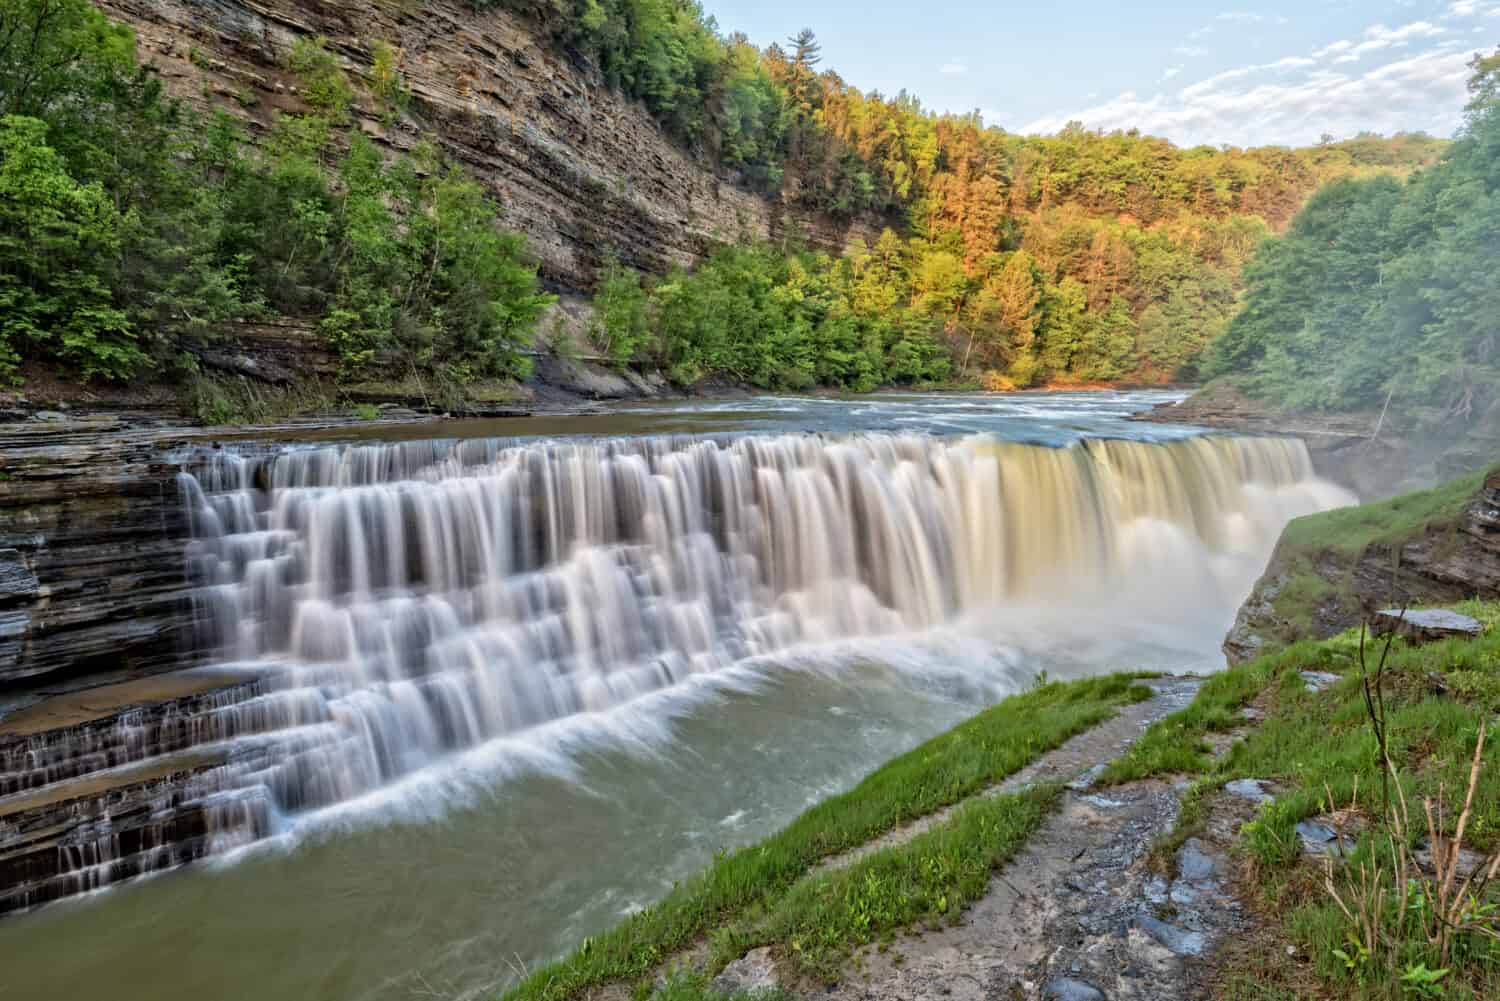 The Lower Falls At Letchworth State Park In New York.  Also Known As The Grand Canyon Of The East.